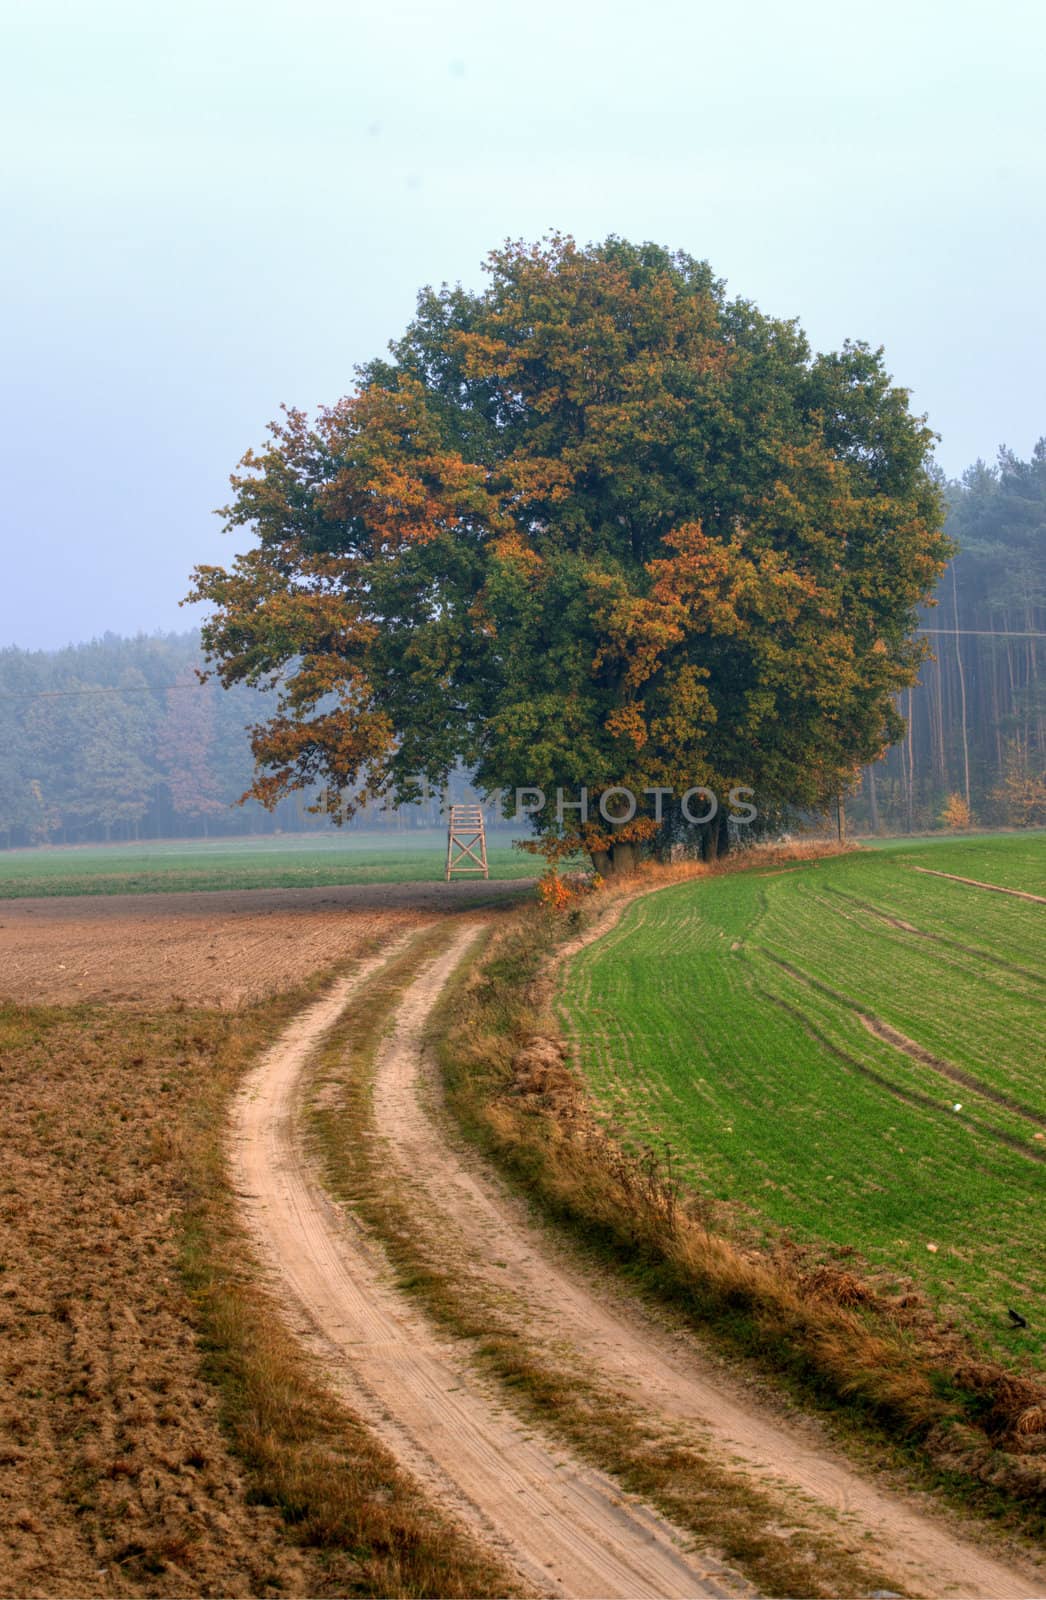 The photo shows the way in a colorful autumn woods HDR.